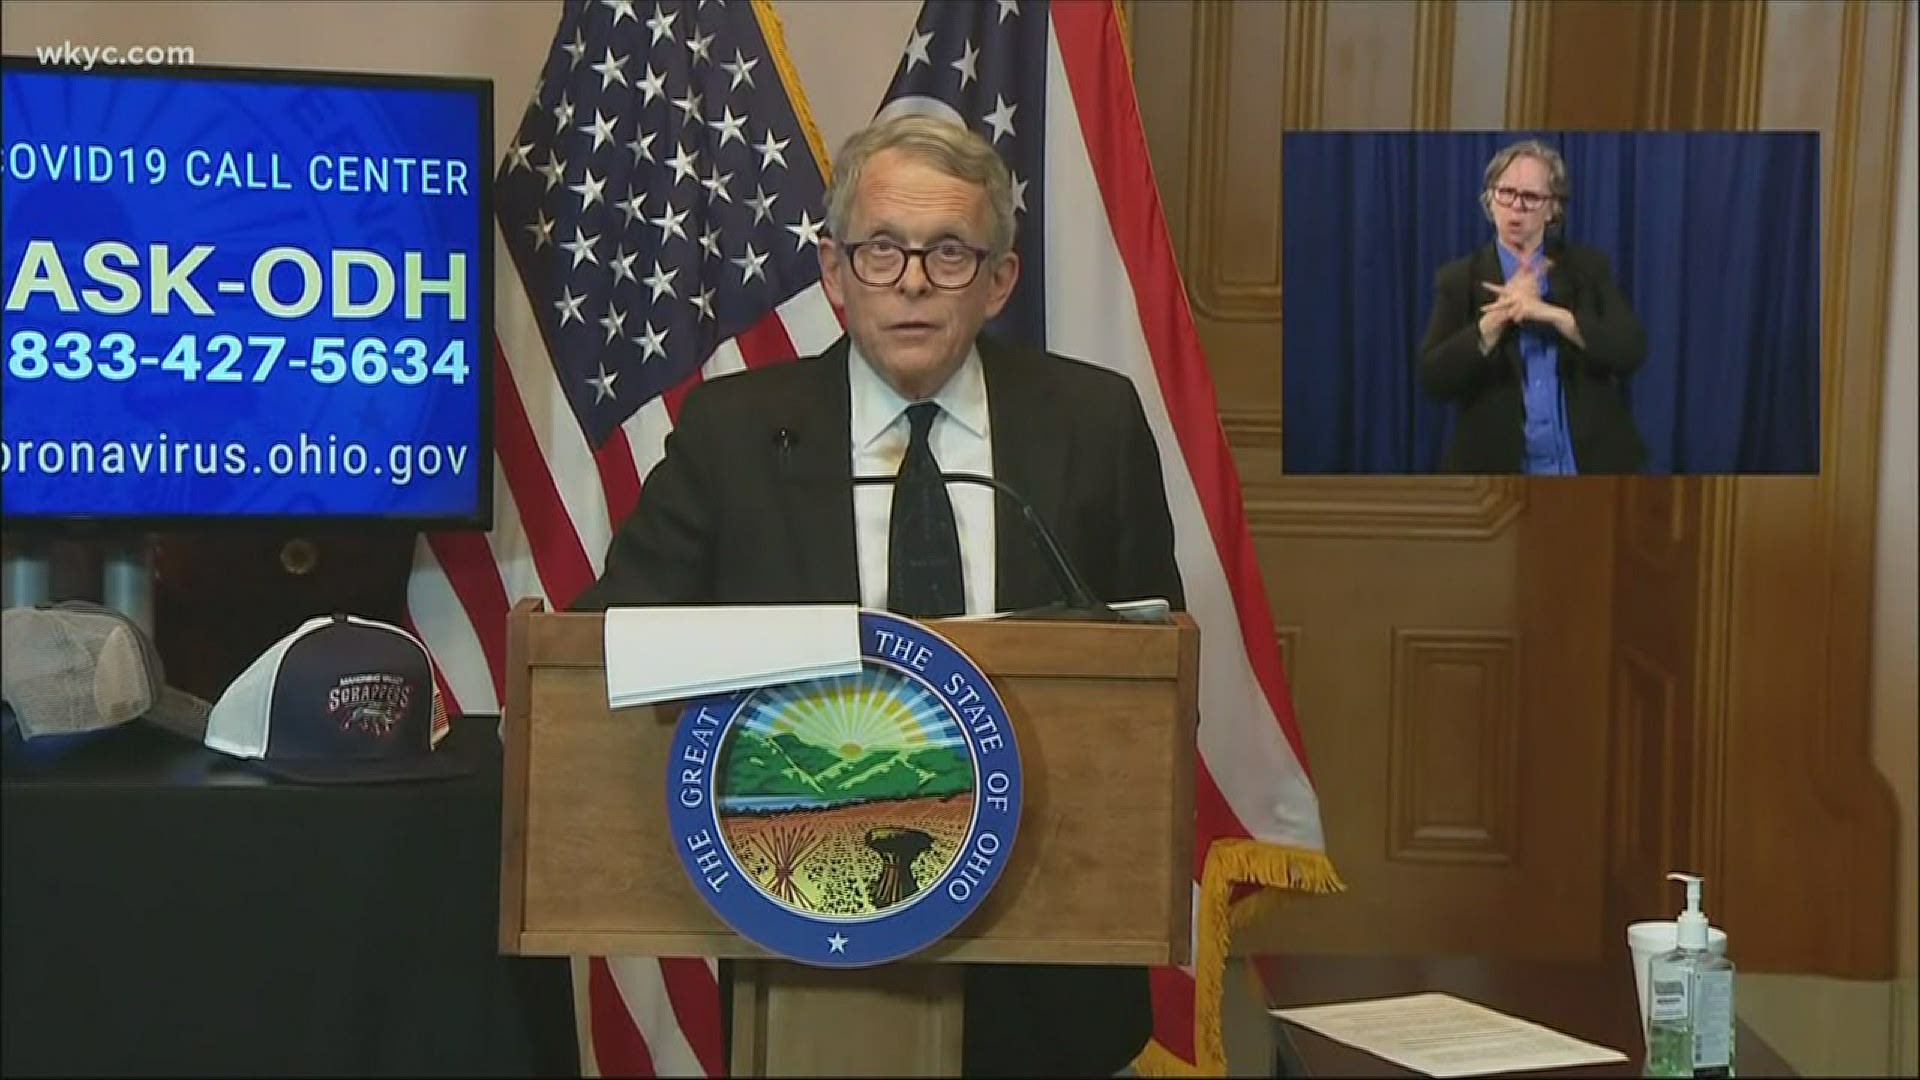 DeWine says citizens' efforts have helped to drastically flatten the curve. Laura Caso reports.